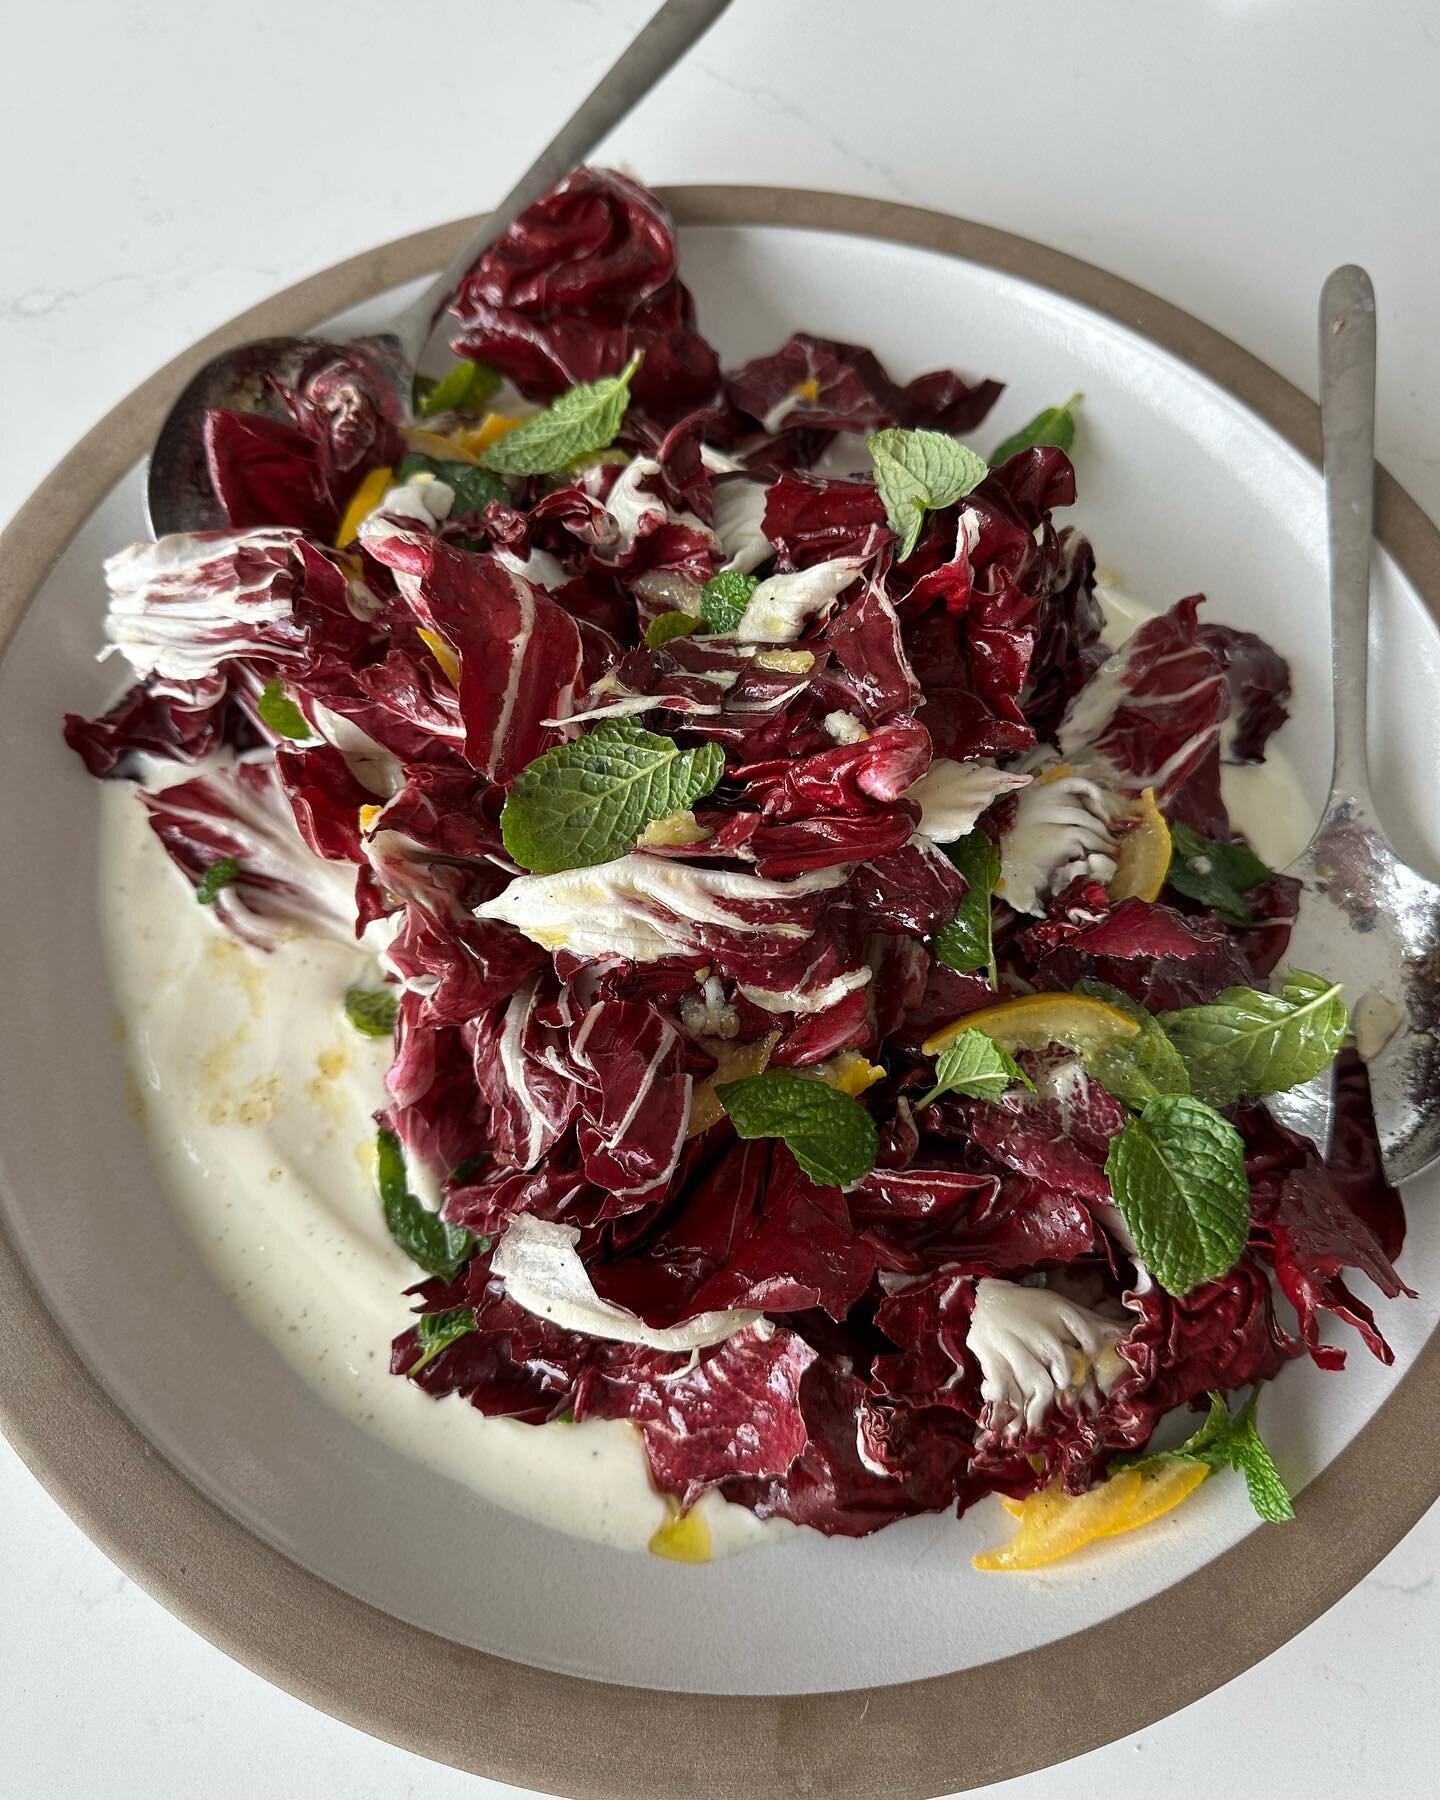 Birthdays are my favorite excuse to experiment in the kitchen and try new recipes! This one is from @alisoneroman  It&rsquo;s a gorgeous raddichio salad with mint and a preserved lemon vinaigrette. It&rsquo;s on top of a lemony yogurt bed. This is ve